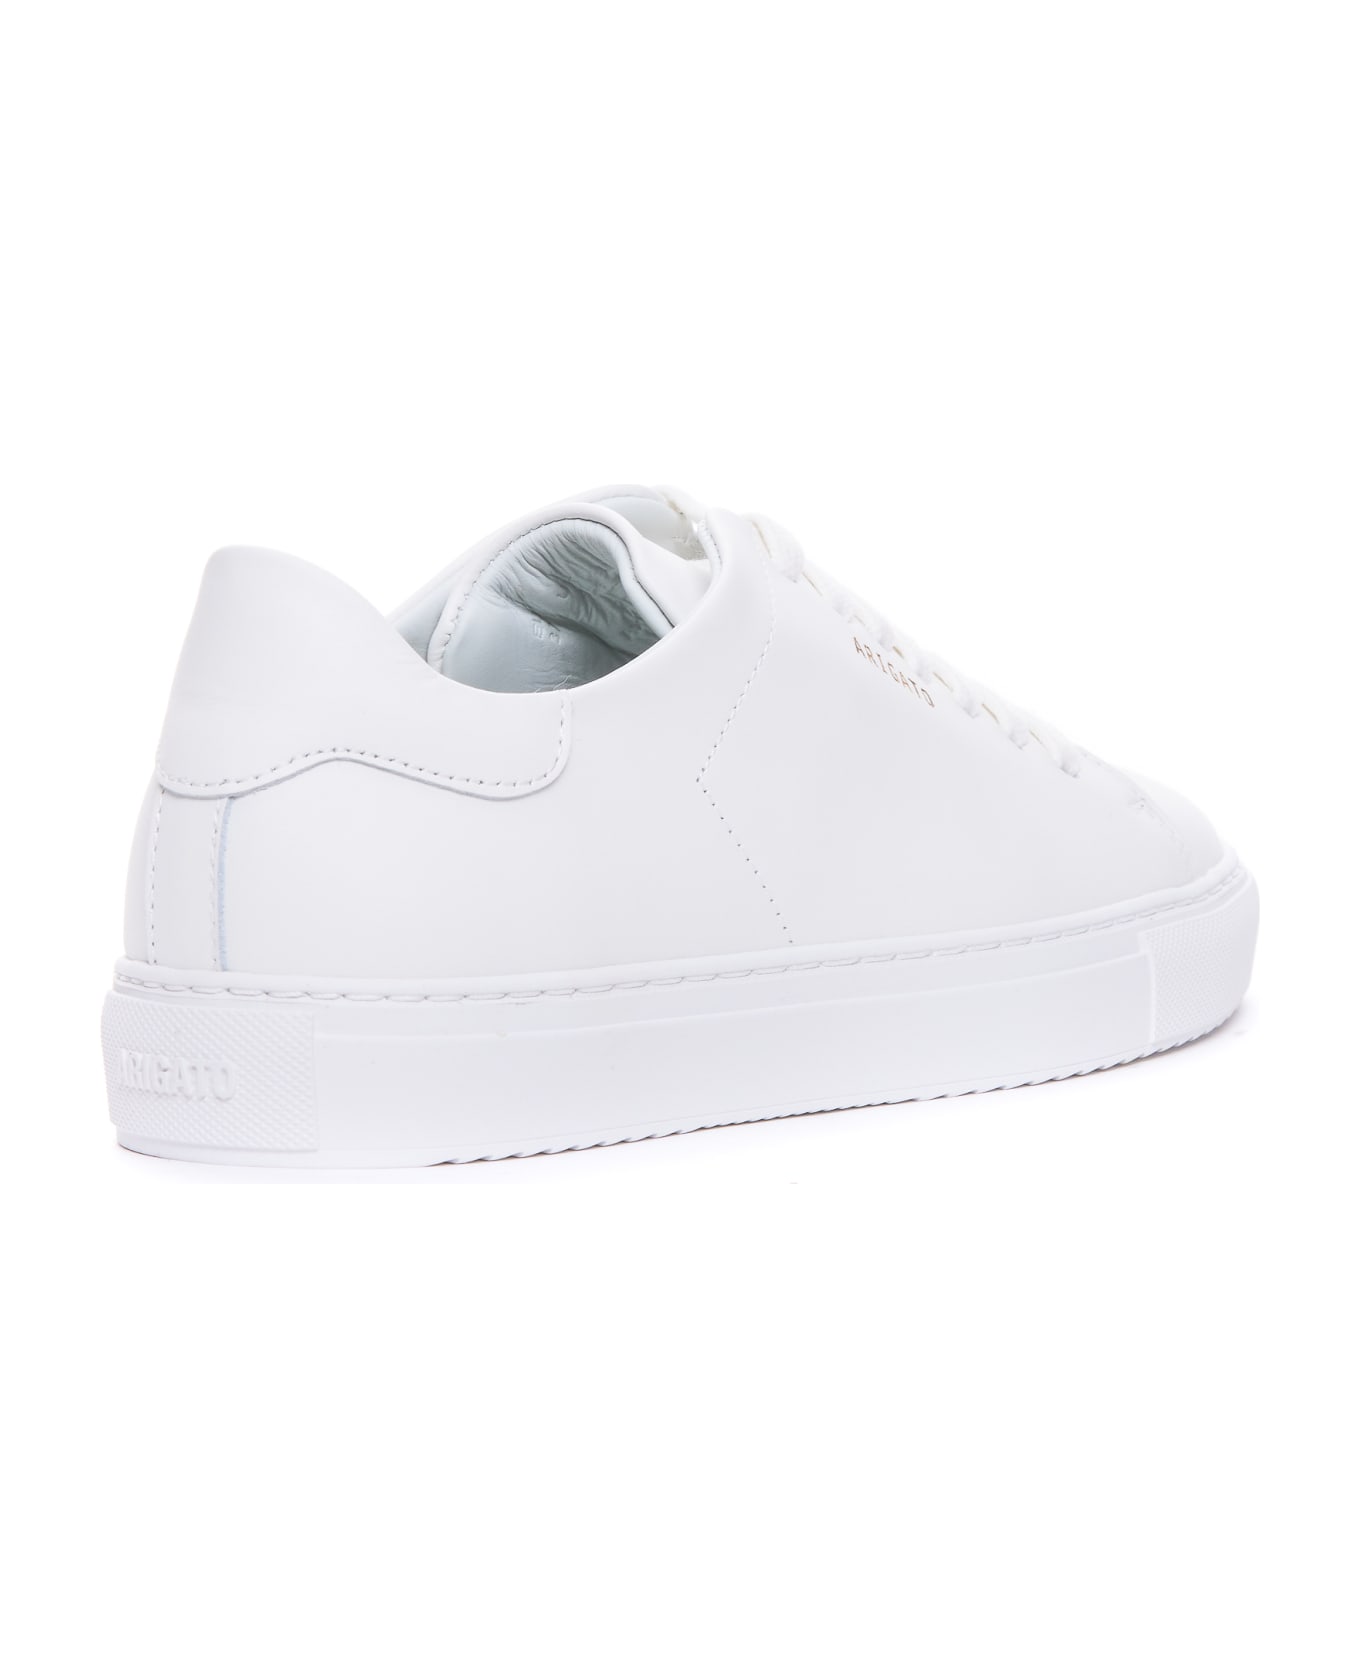 Axel Arigato Clean 90 Sneakers - White スニーカー